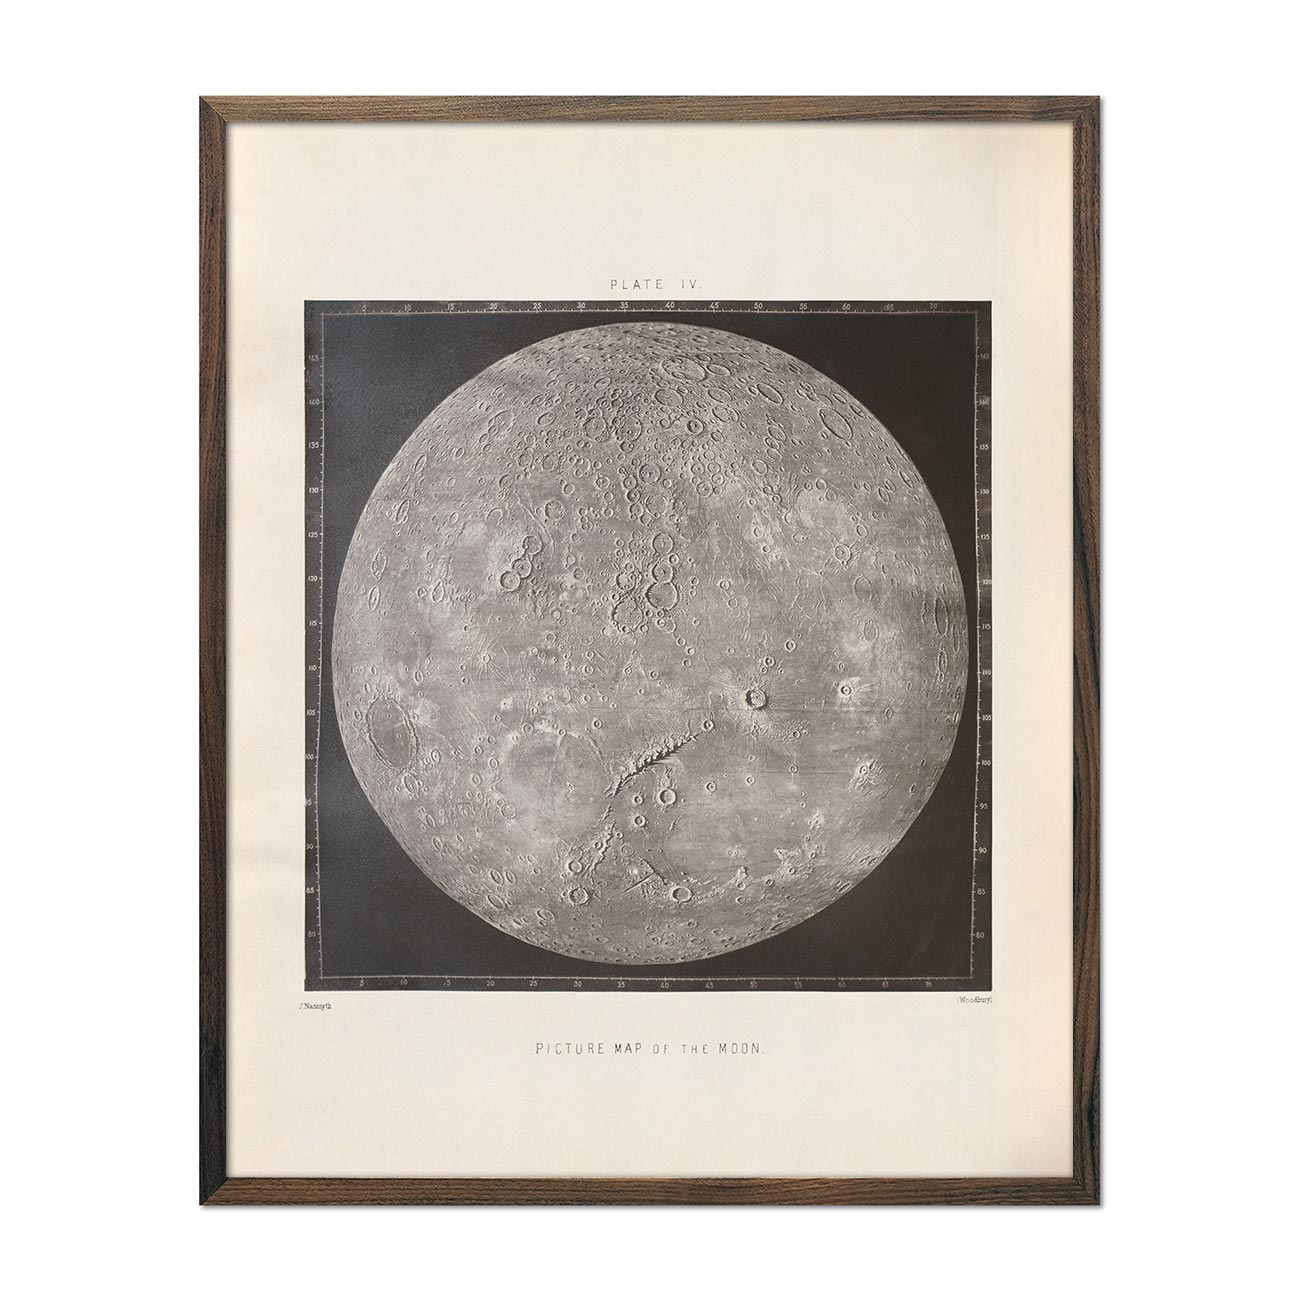 Aspect of an Eclipse of the Sun by the Earth from the Moon Photo from 1874  - Muir Way